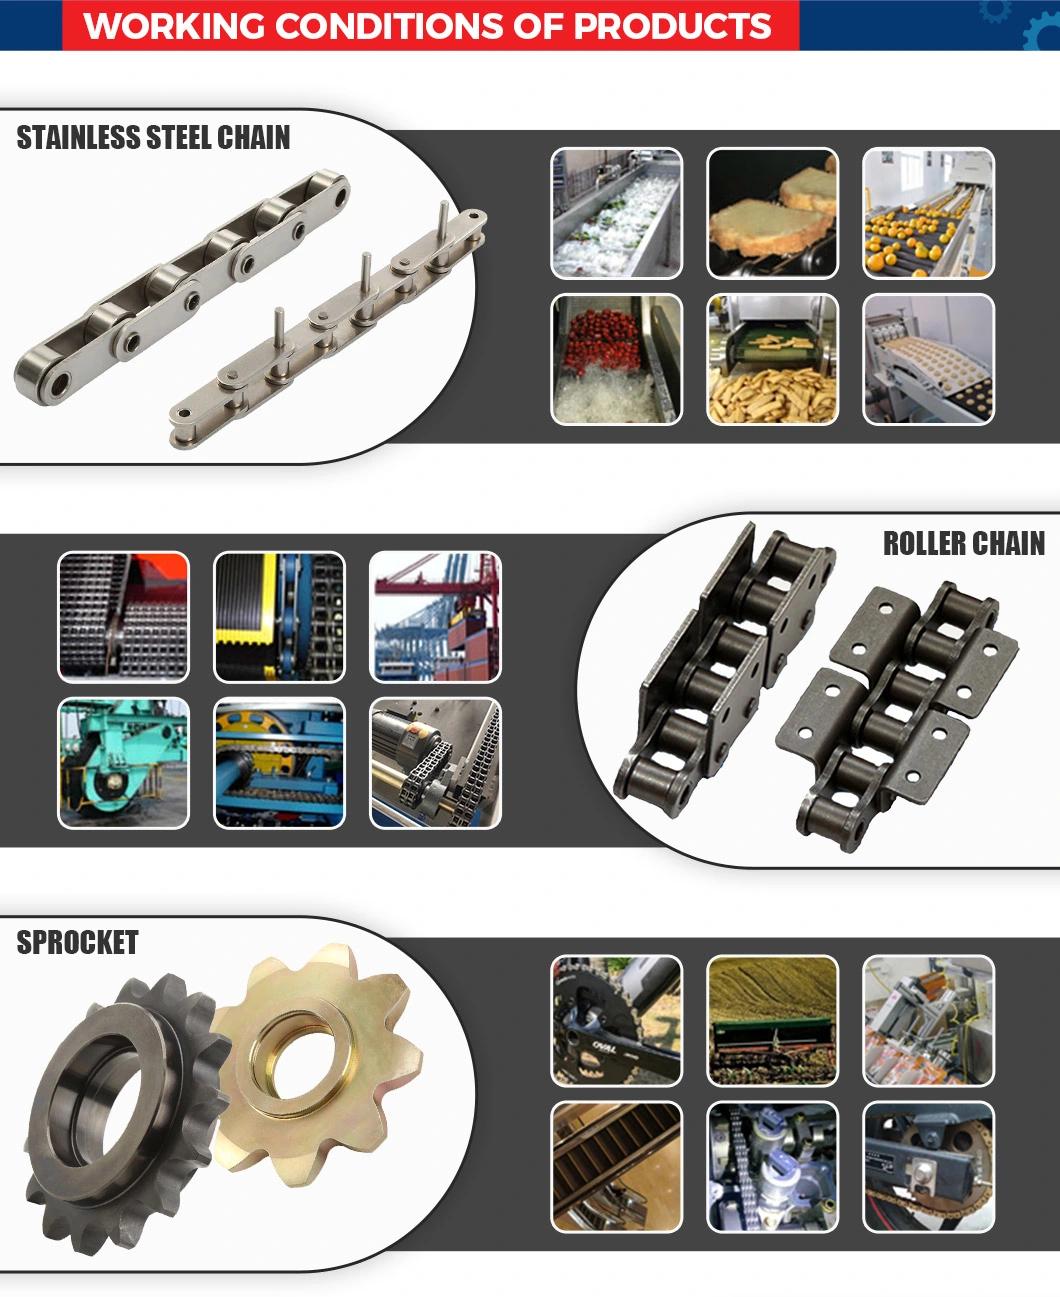 Made-to-Order Alloy/Carbon Steel Agricultural Part Chain (CA550K18)